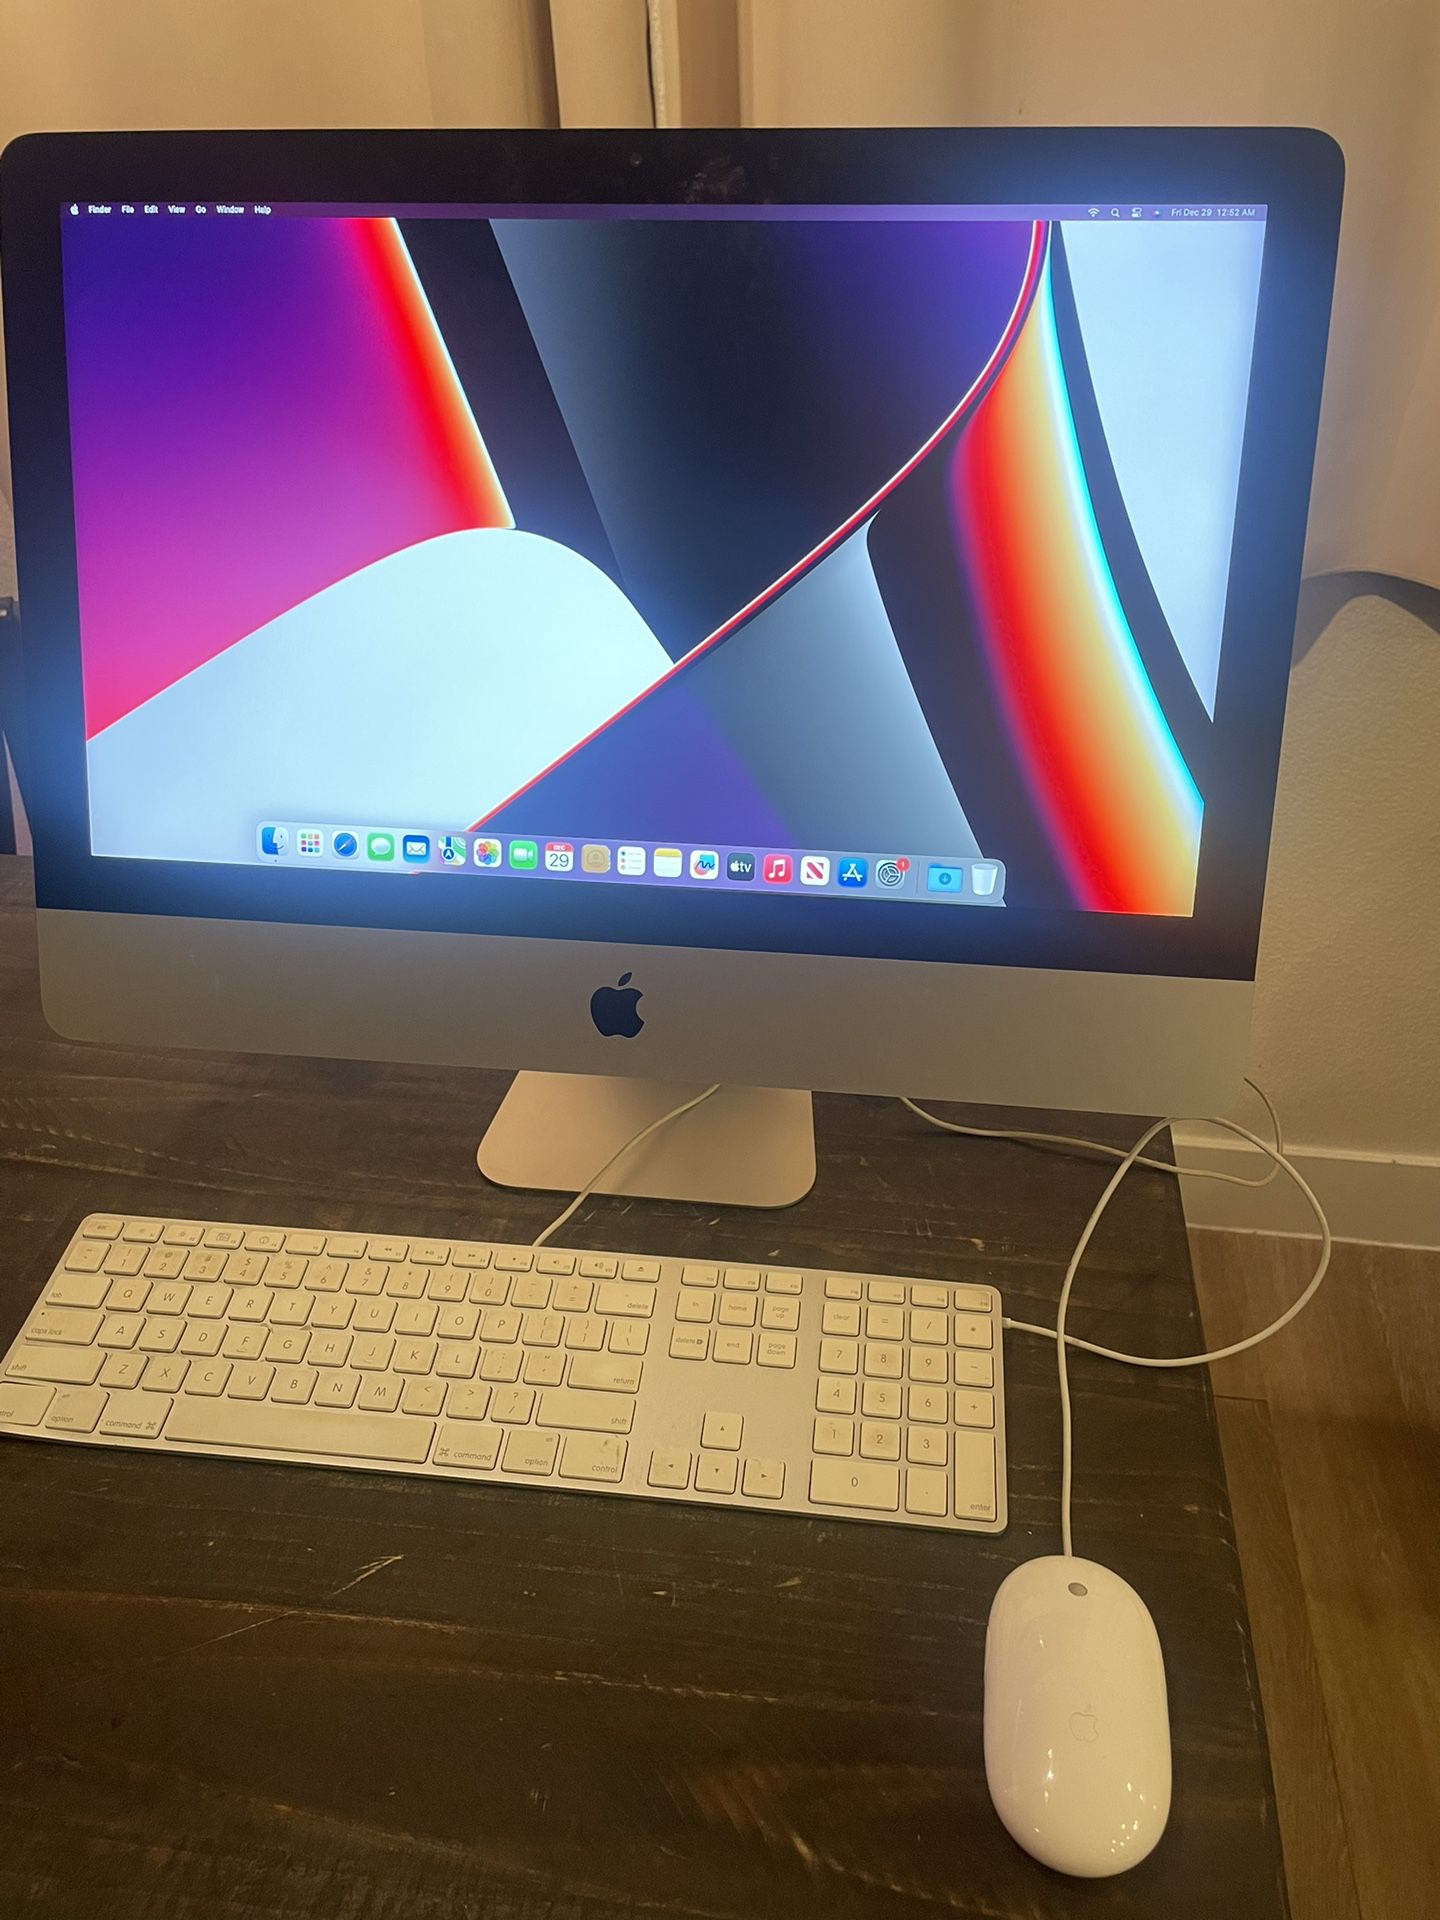 2017 Apple iMac 21.5-inch 4K Retina display 16gb Ram 256gb Ssd. Ventura macOS. Works Great. Wired Keyboard and Mouse 